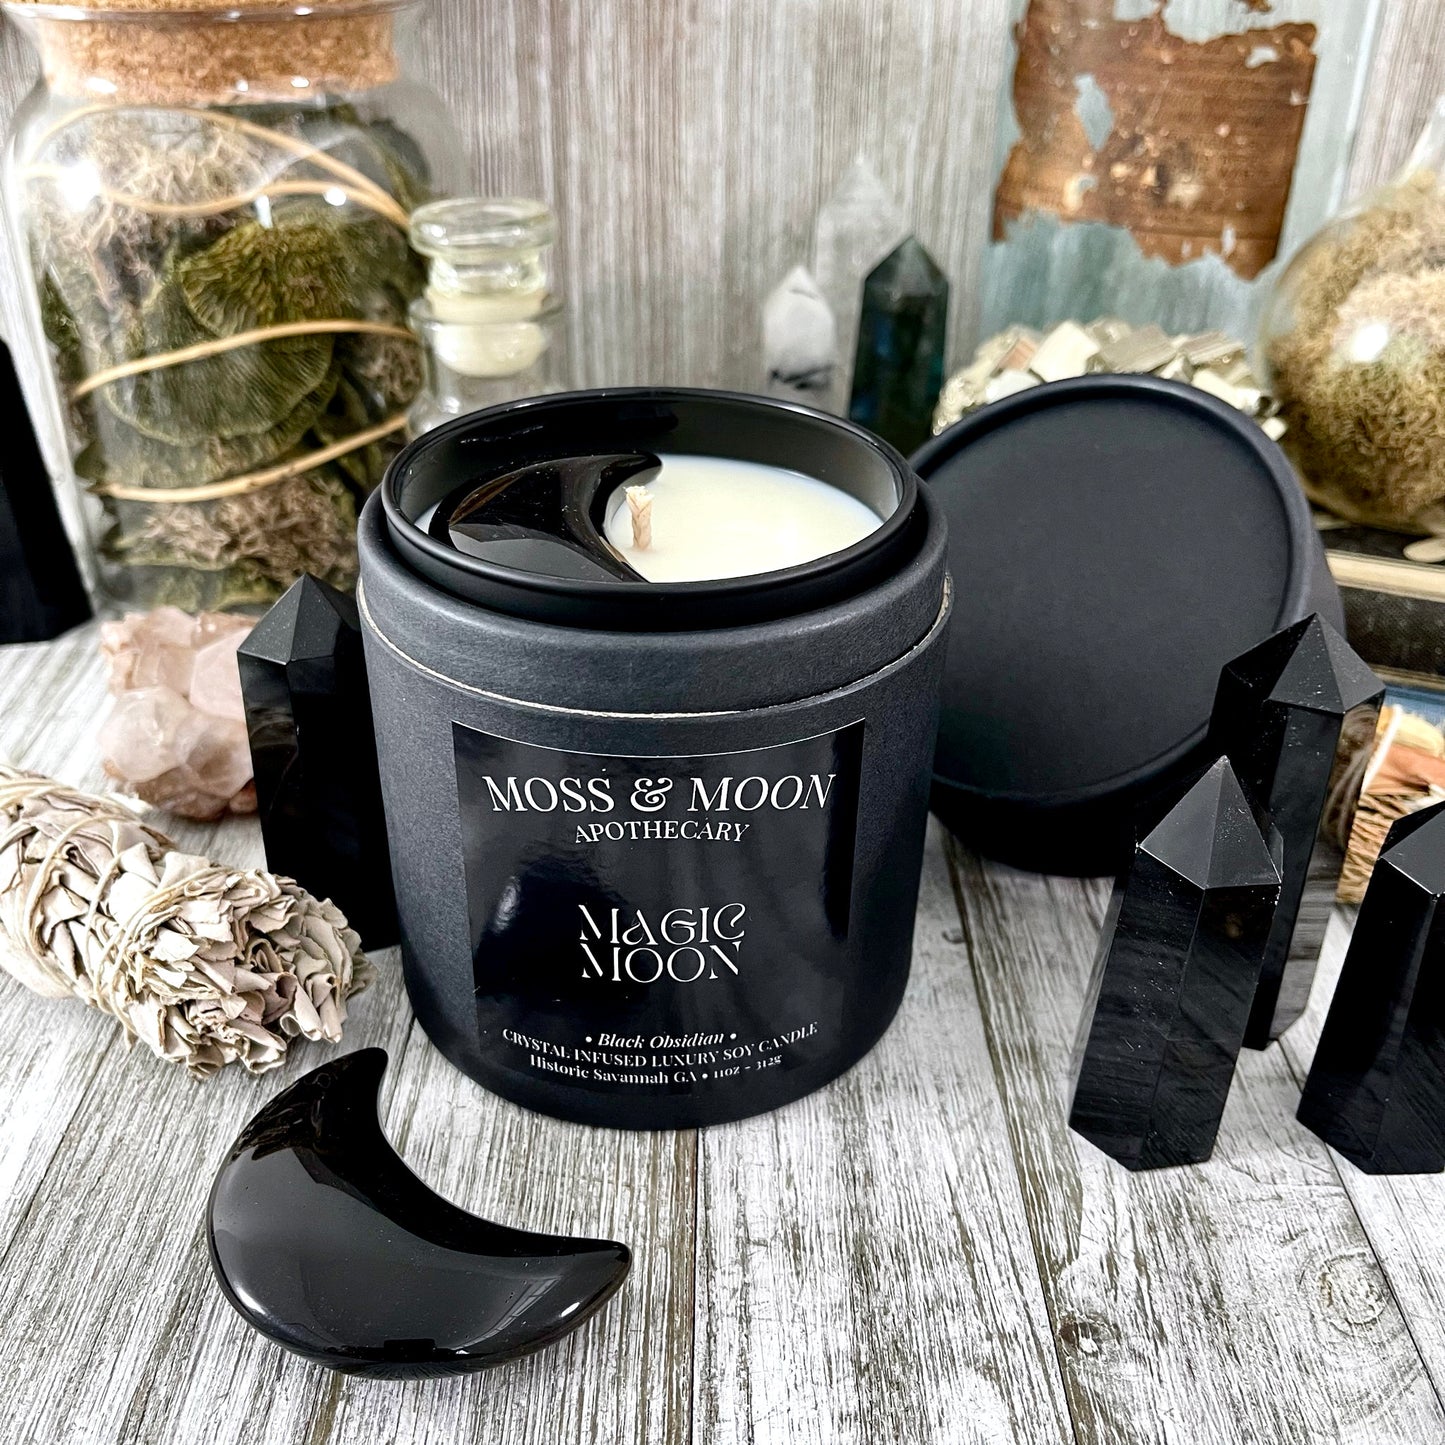 aromatherapy candle, Black Obsidian, Candles, Candles & Holders, Container Candles, crystal candle, Crystal Candles, crystal healing, eco-friendly candle, Etsy ID: 1480225113, handmade candle, Home & Living, Home Decor, luxury candle, Magic Moon Candle, m